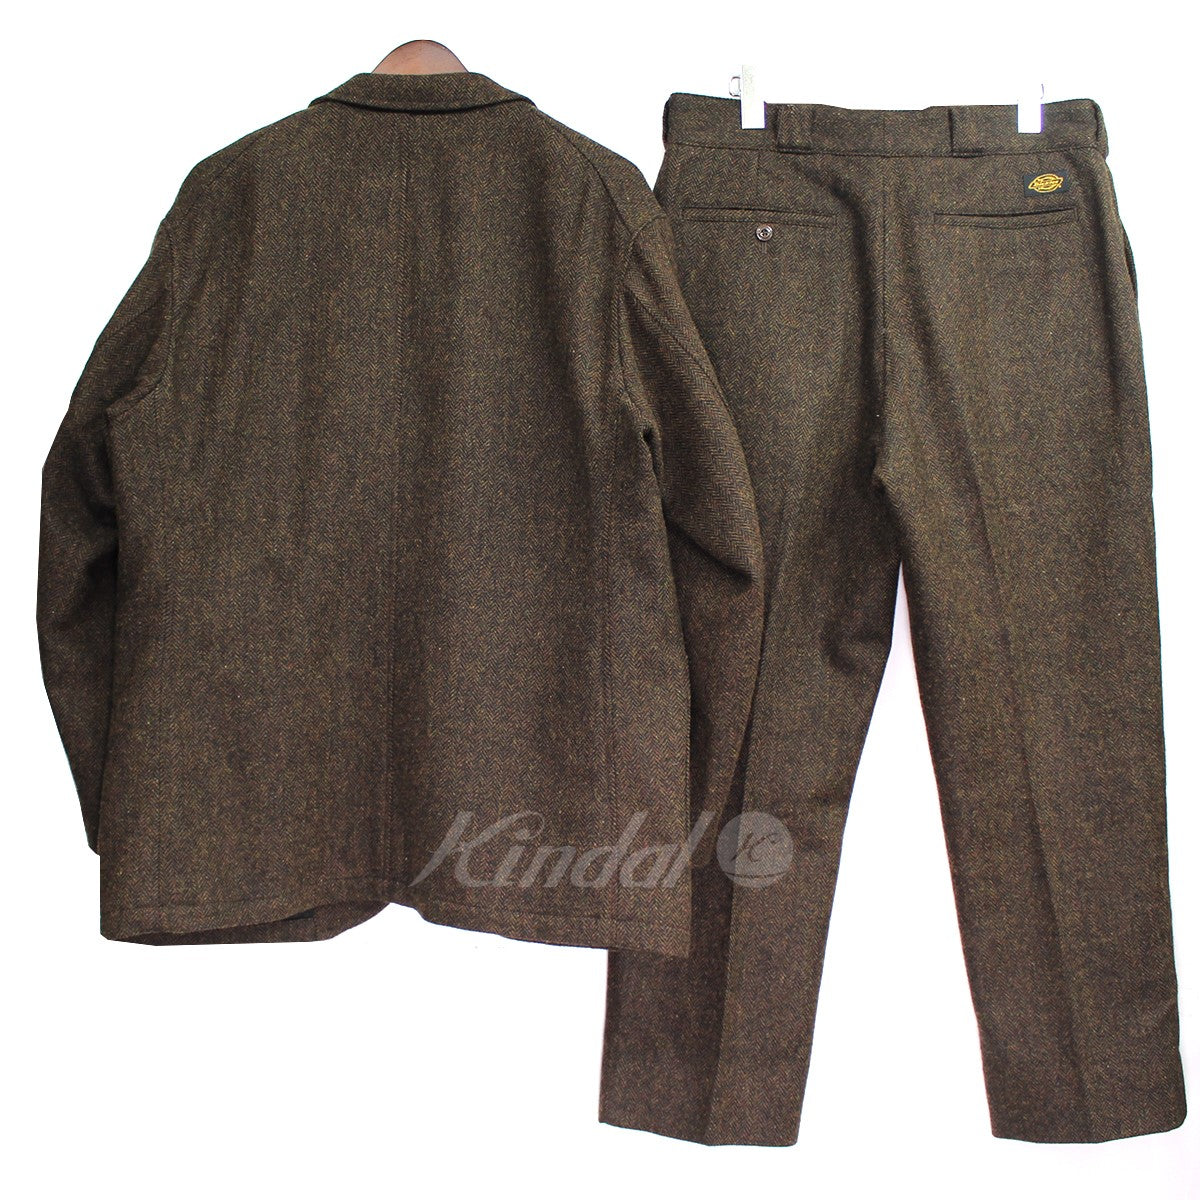 TRIPSTER×Dickies×BEAMS 19AW ツイードセットアップ スーツ 194M10BM01 ...